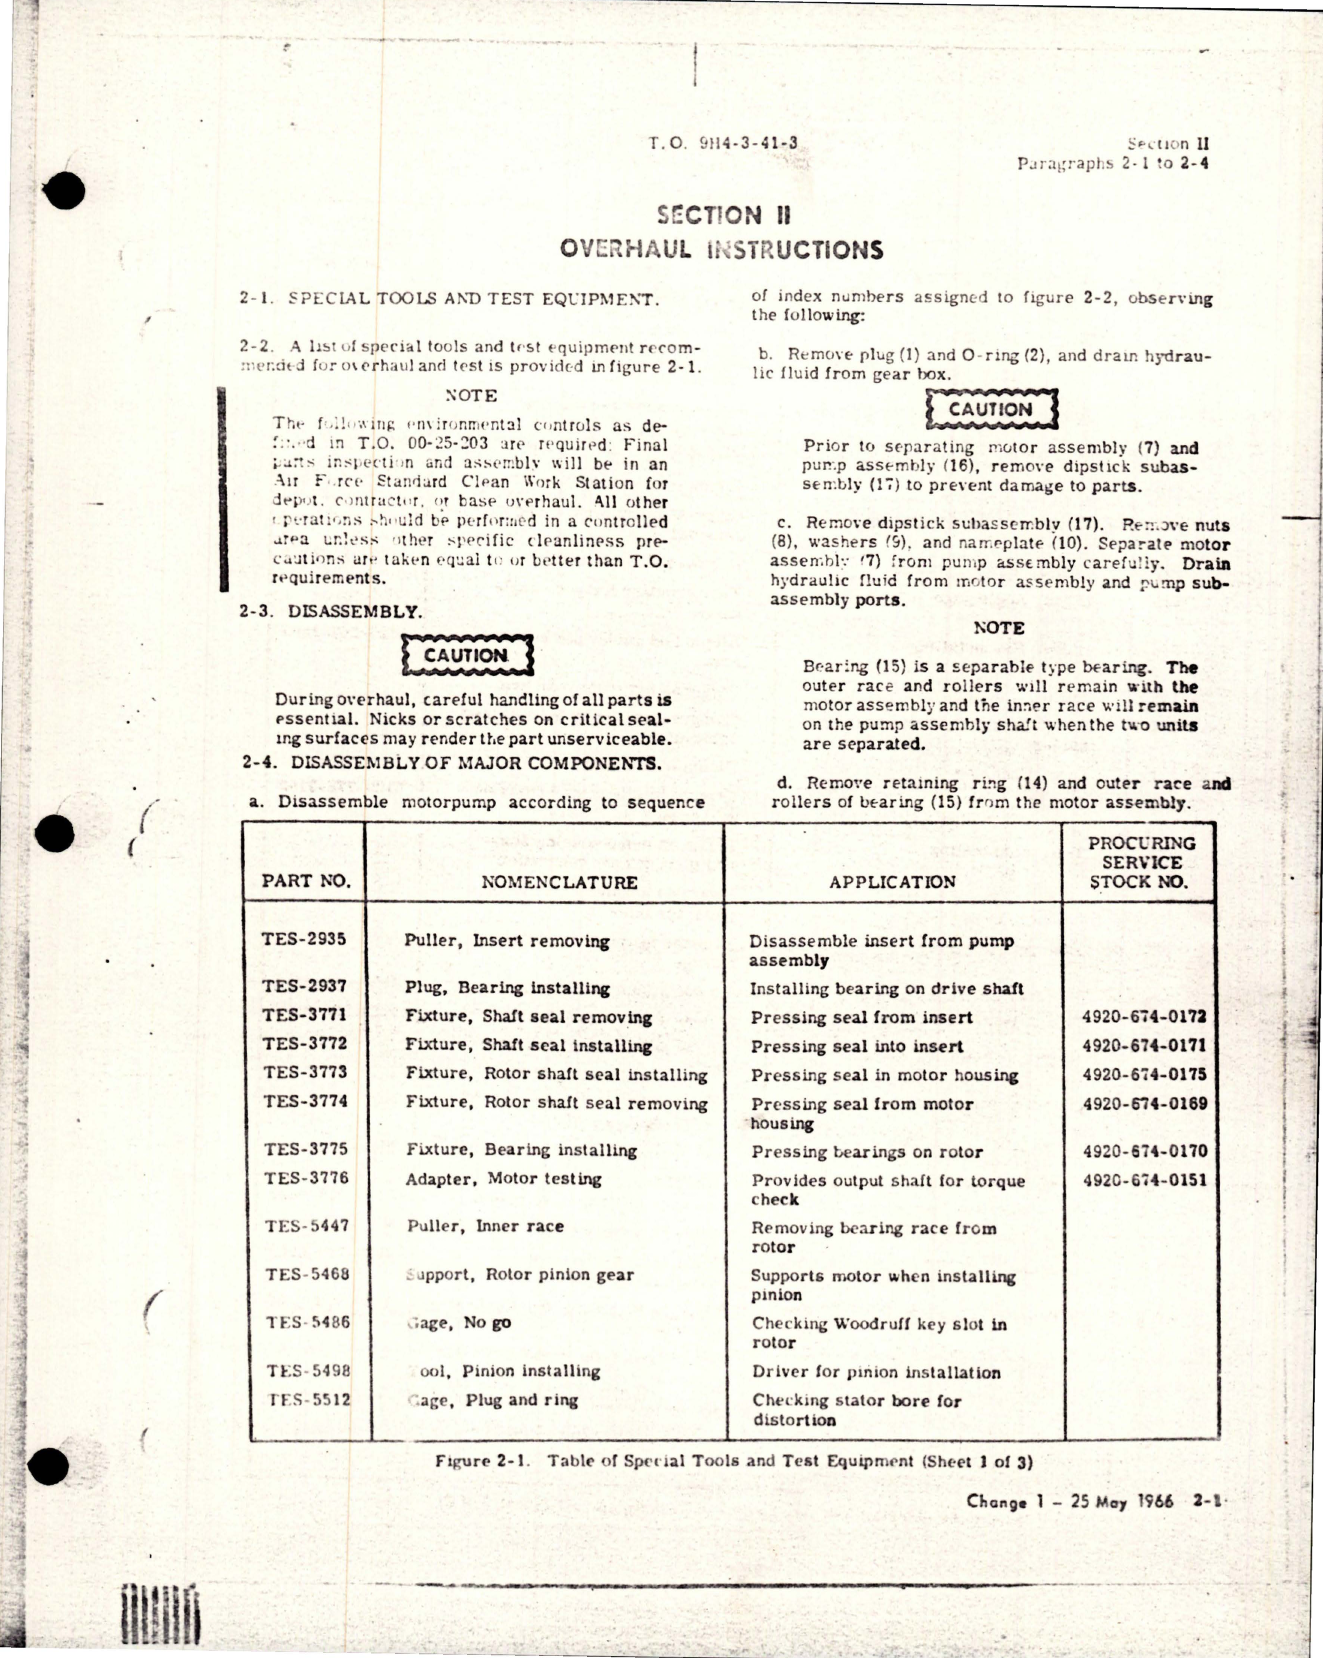 Sample page 7 from AirCorps Library document: Overhaul Instructions for Electrically Driven Hydraulic Motorpump - Change No. 8 